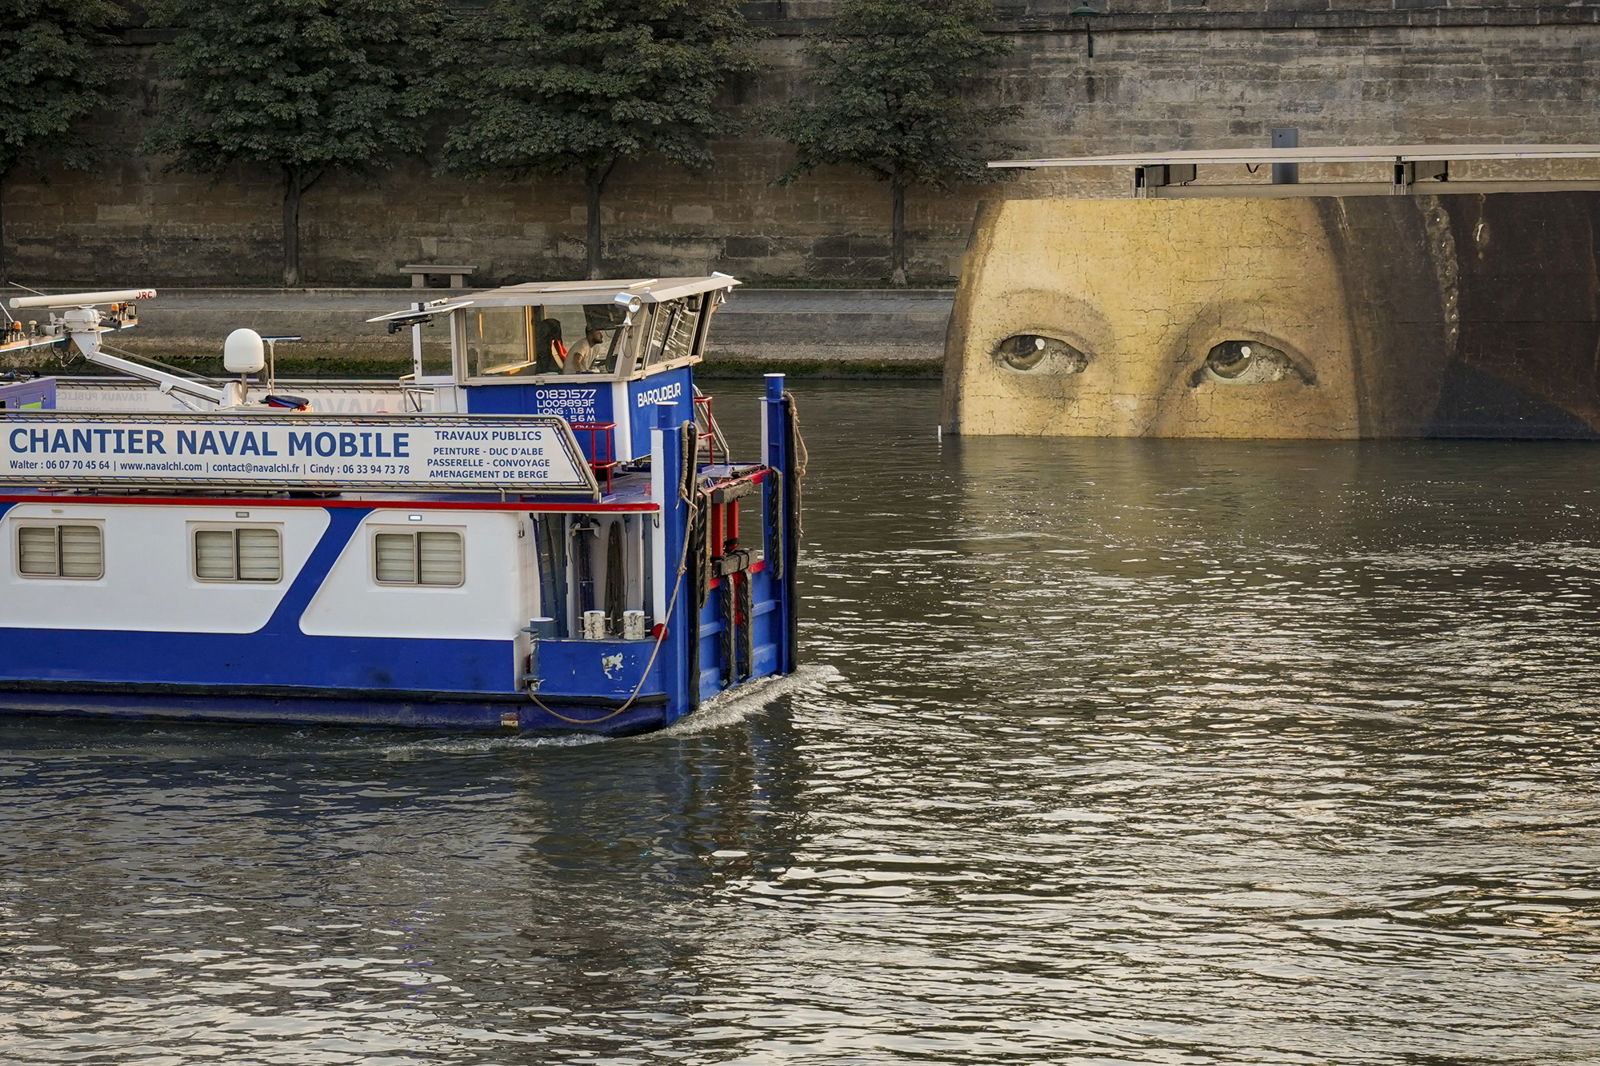 A painting in the background appears to look at a tugboat on the River Seine hauling away parts of the start of the postponed men's triathlon at the Paris Olympics.